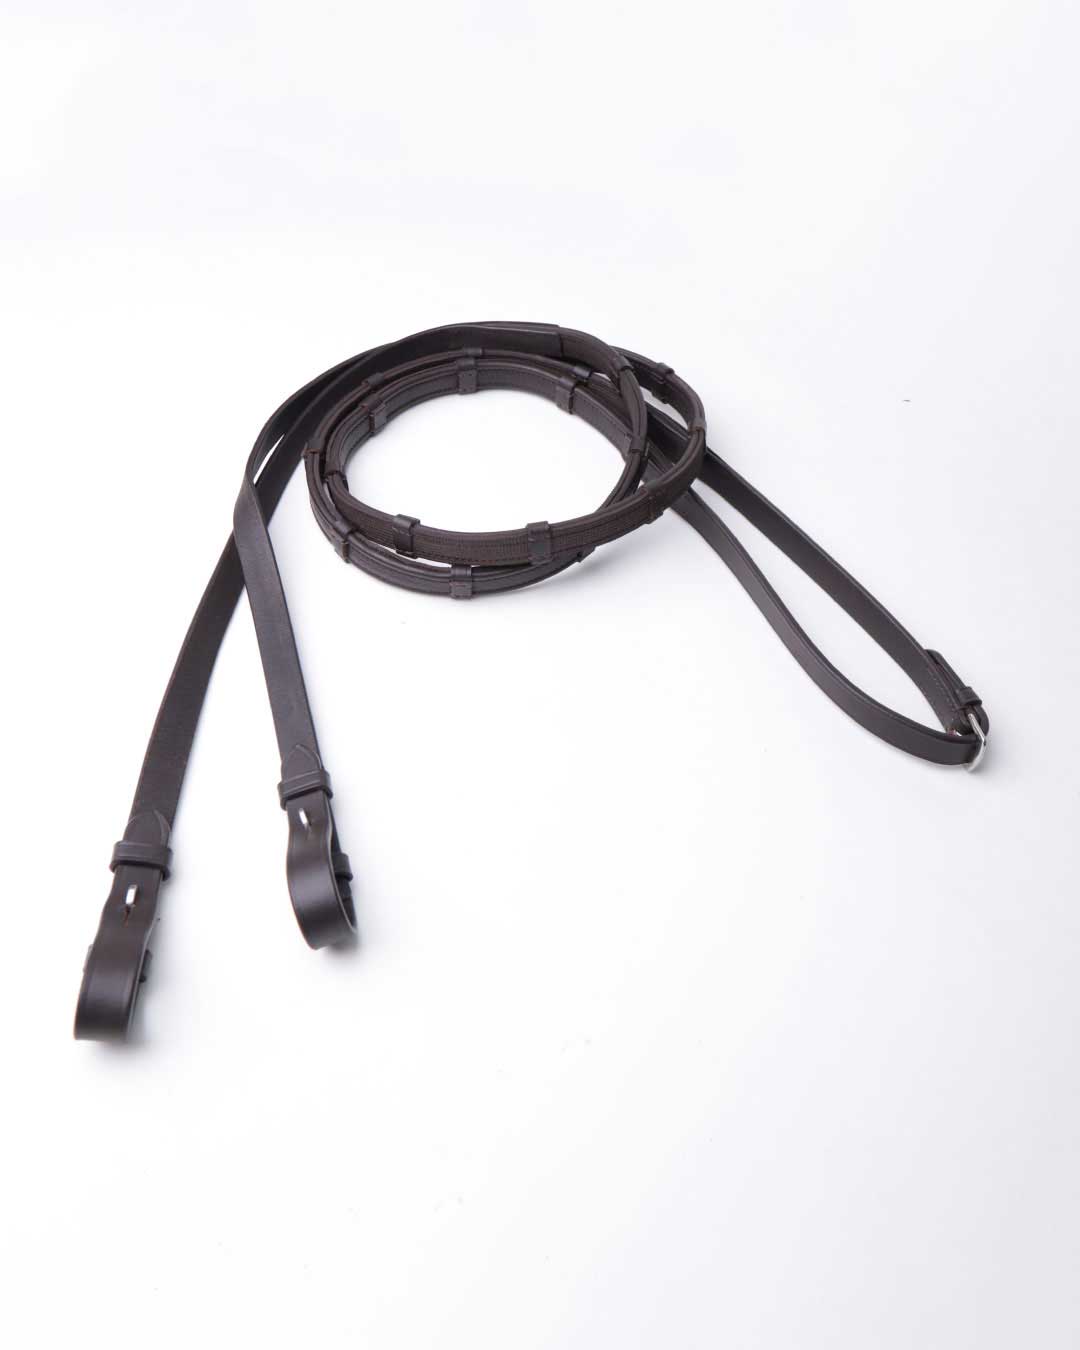 Soft leather rubber grip rein with stopper.